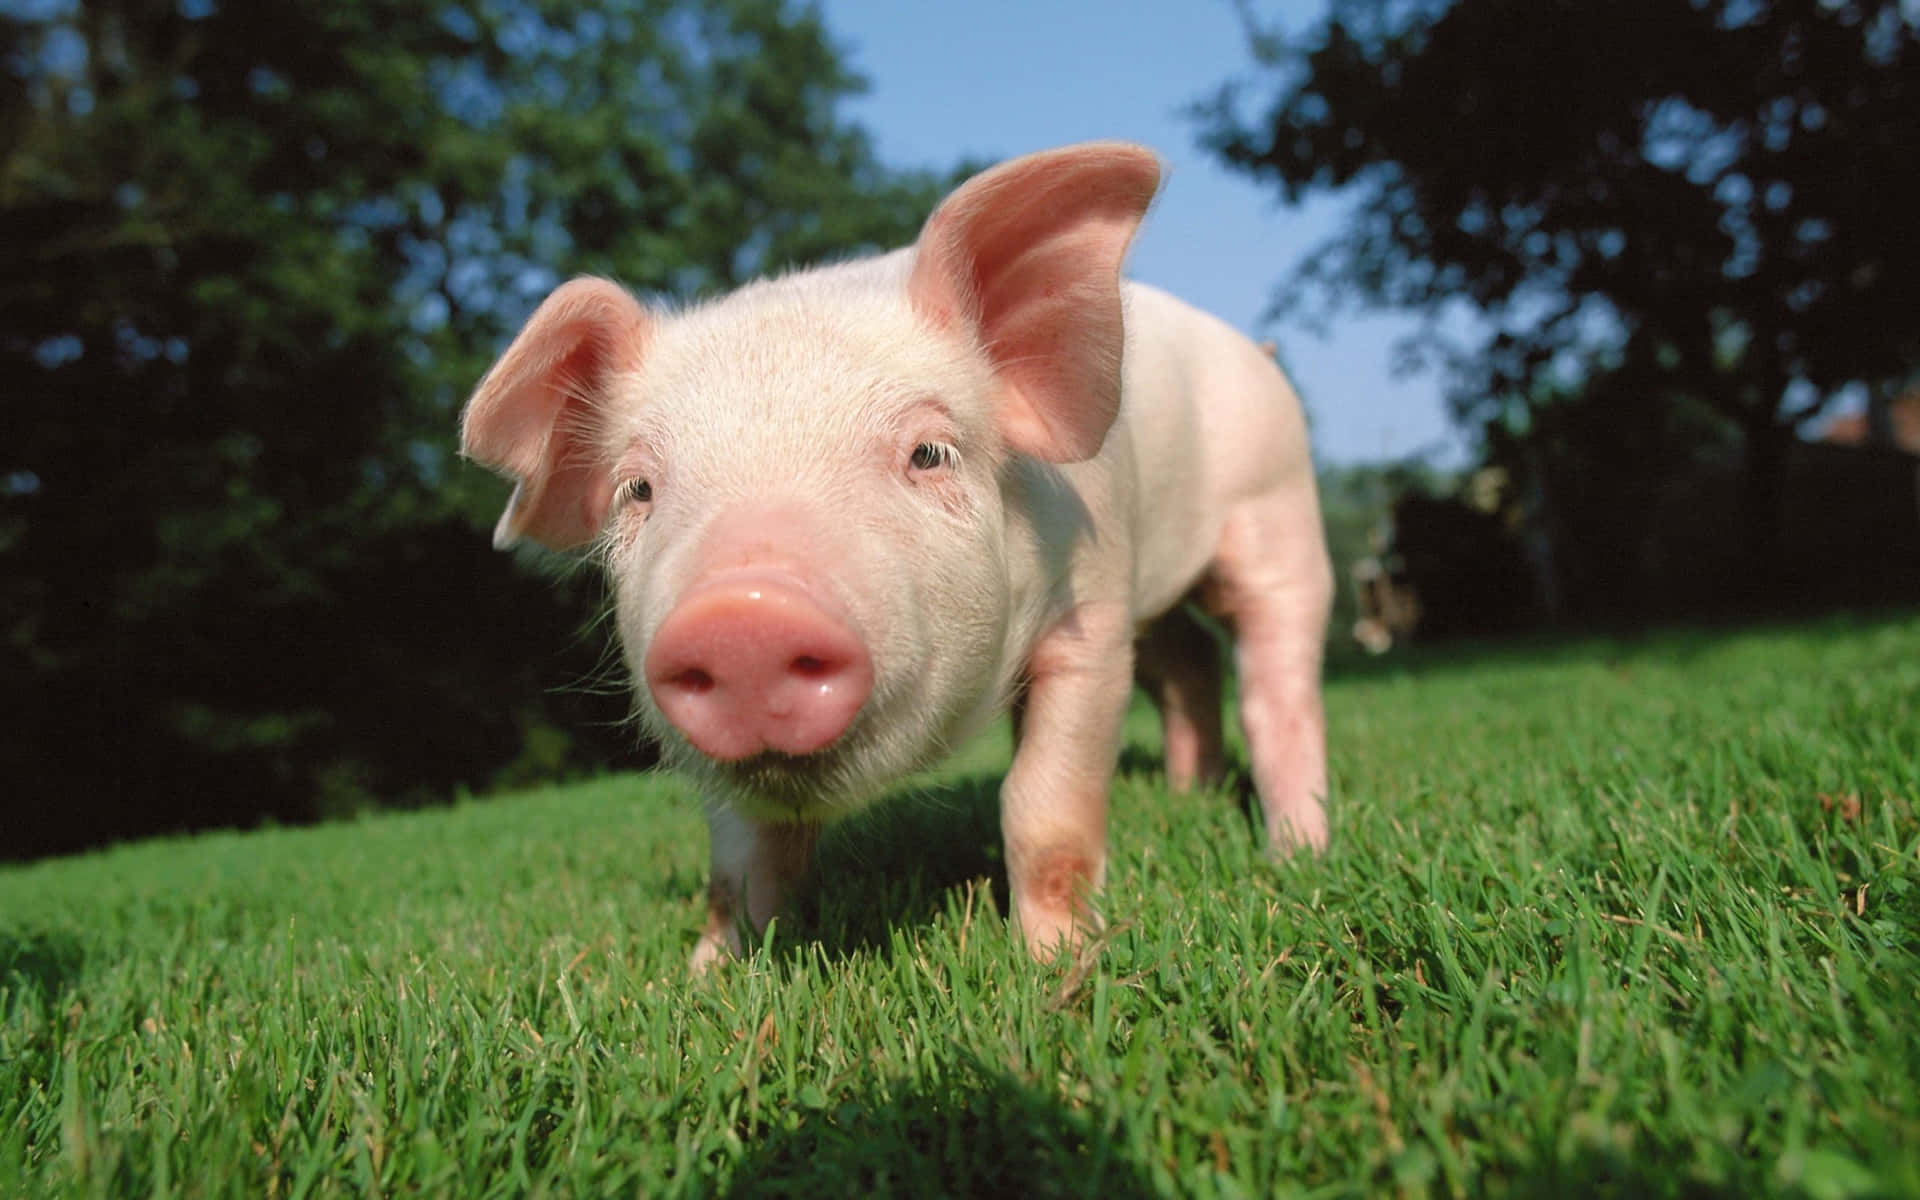 A cute pink pig smiling and enjoying the fresh outdoors.